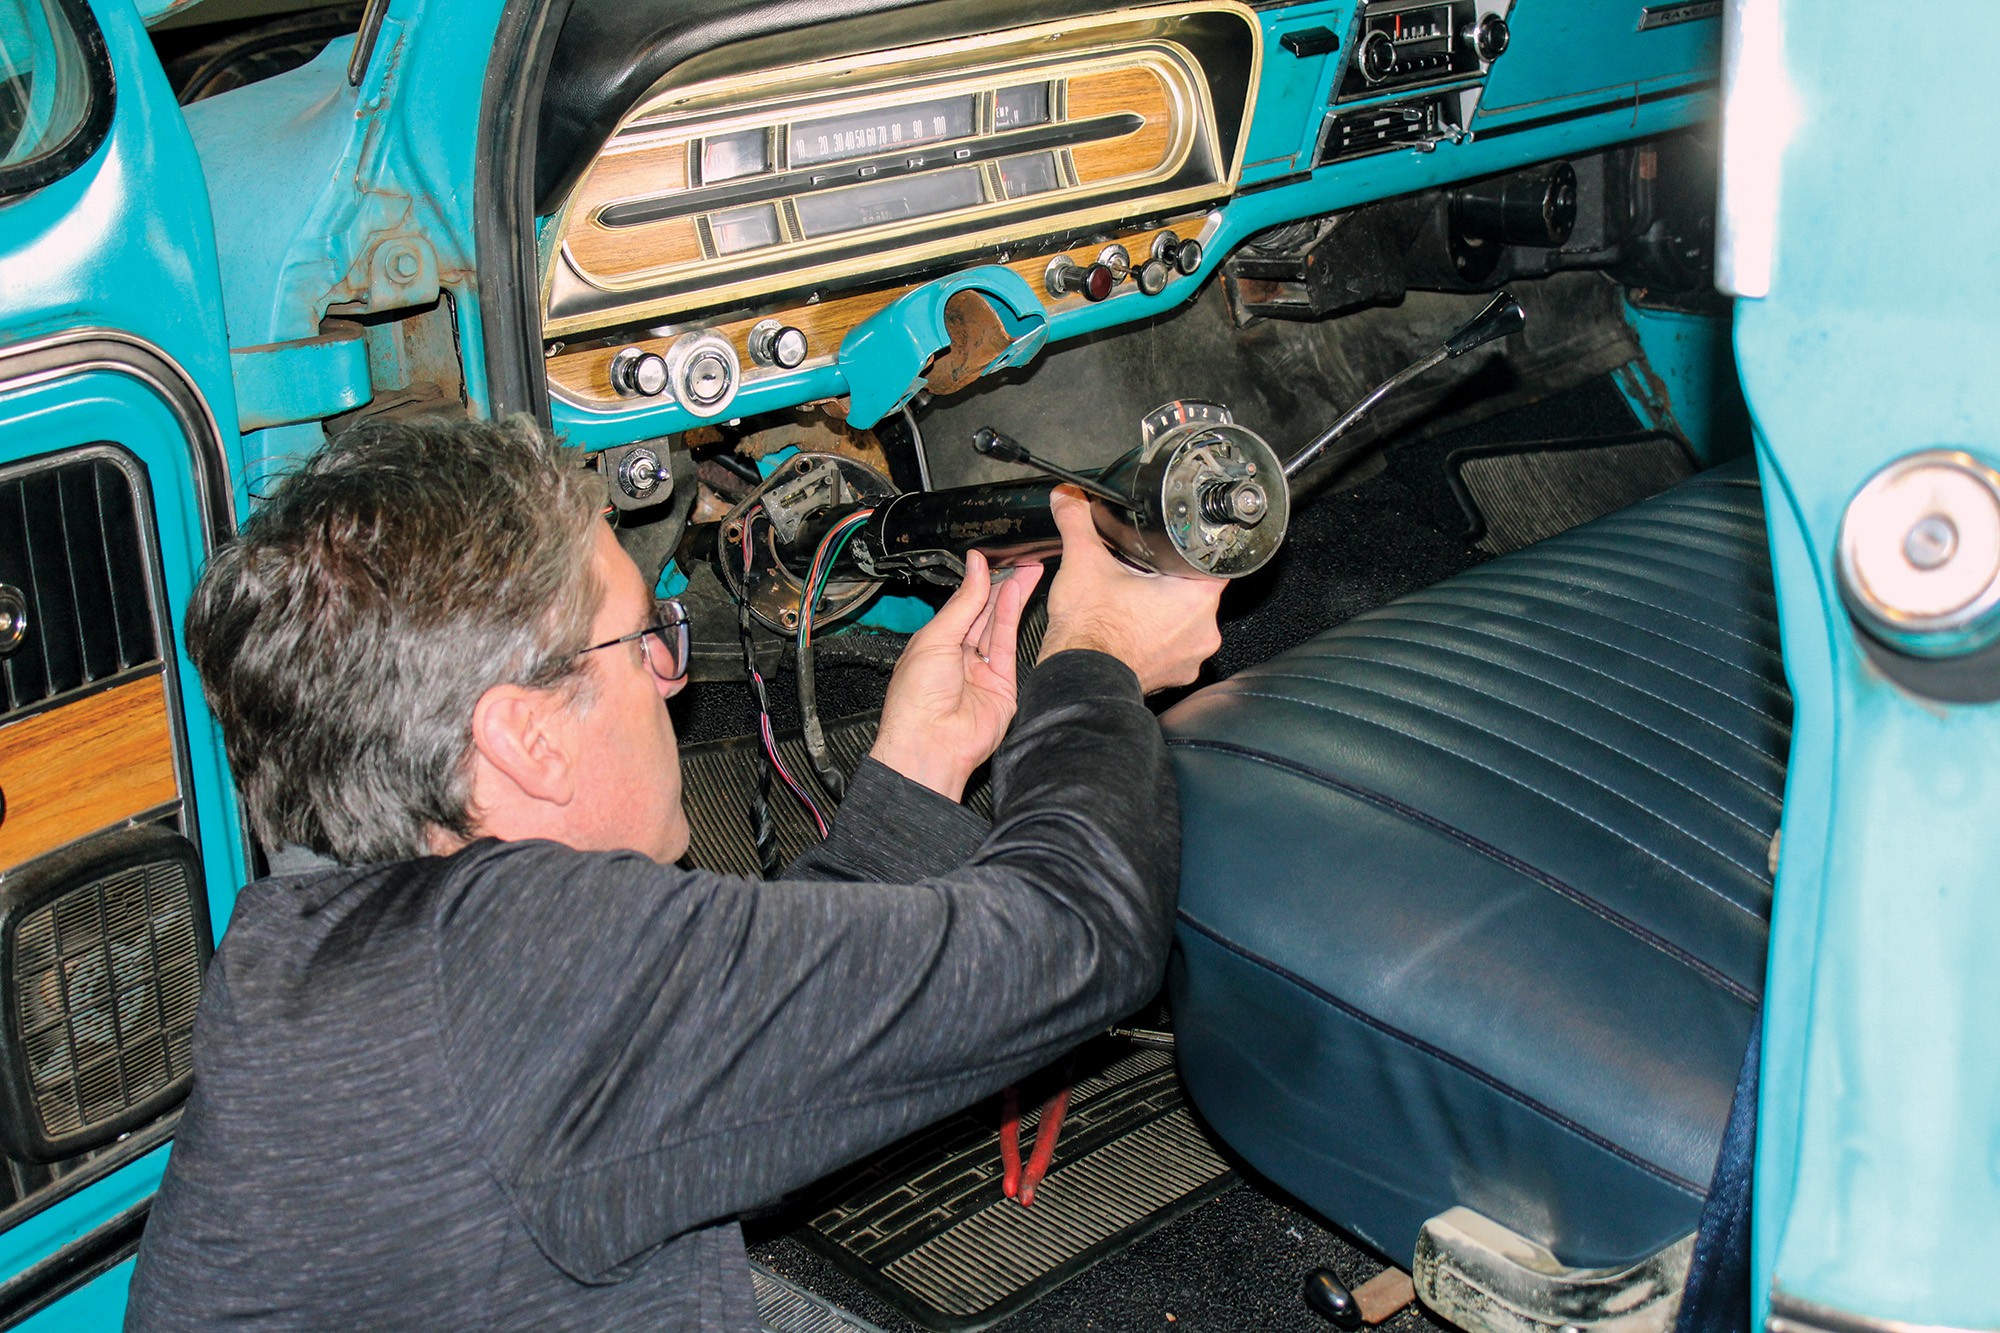 A Simple Bearing Replacement Transforms The Steering Performance of a Vintage Ford Truck